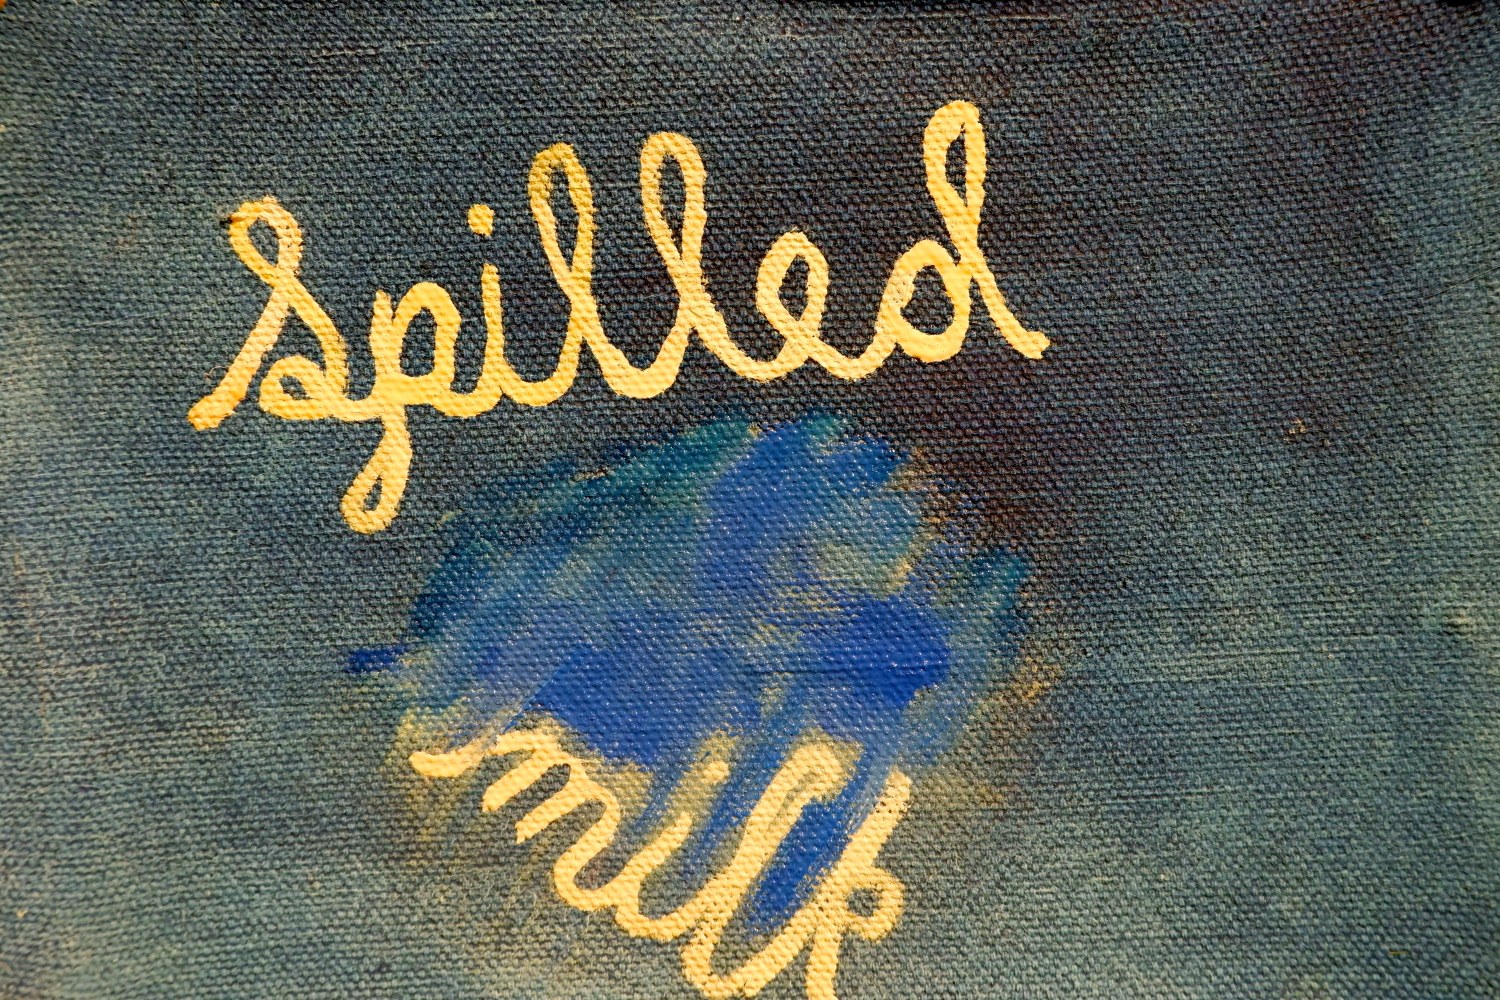 Ashley Wick, Spilled Milk  00:41 Duration  Oil Painted Animation, Edition of 4 (On USB With Archival Print)